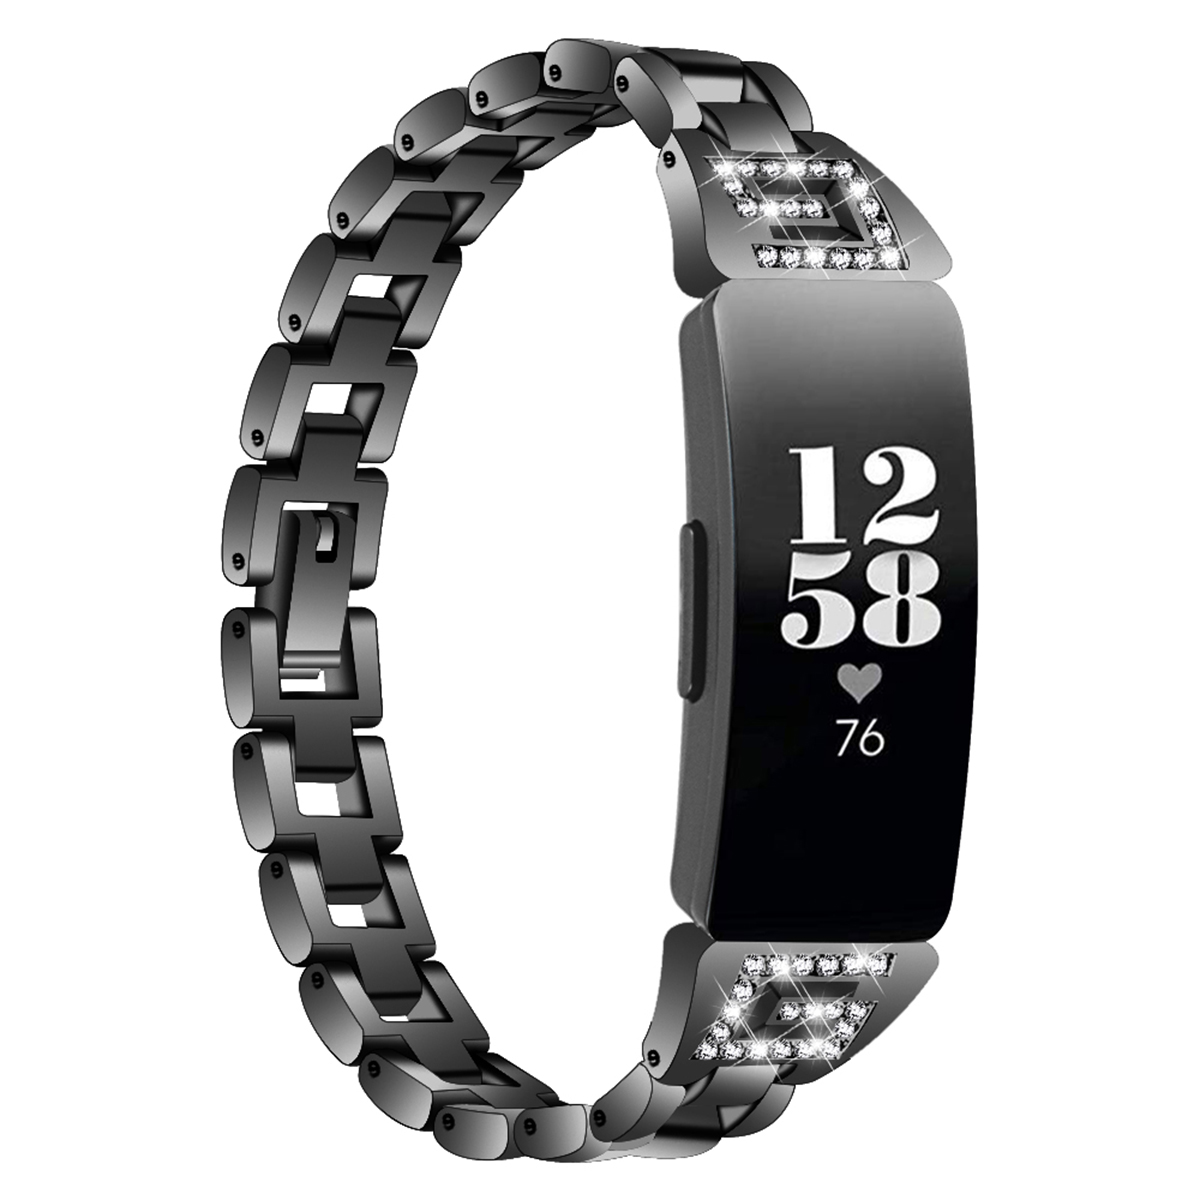 Bakeey-Watch-band-Stainless-Steel-Watch-Strap-For-Fitbit-InspireHR-1607091-3